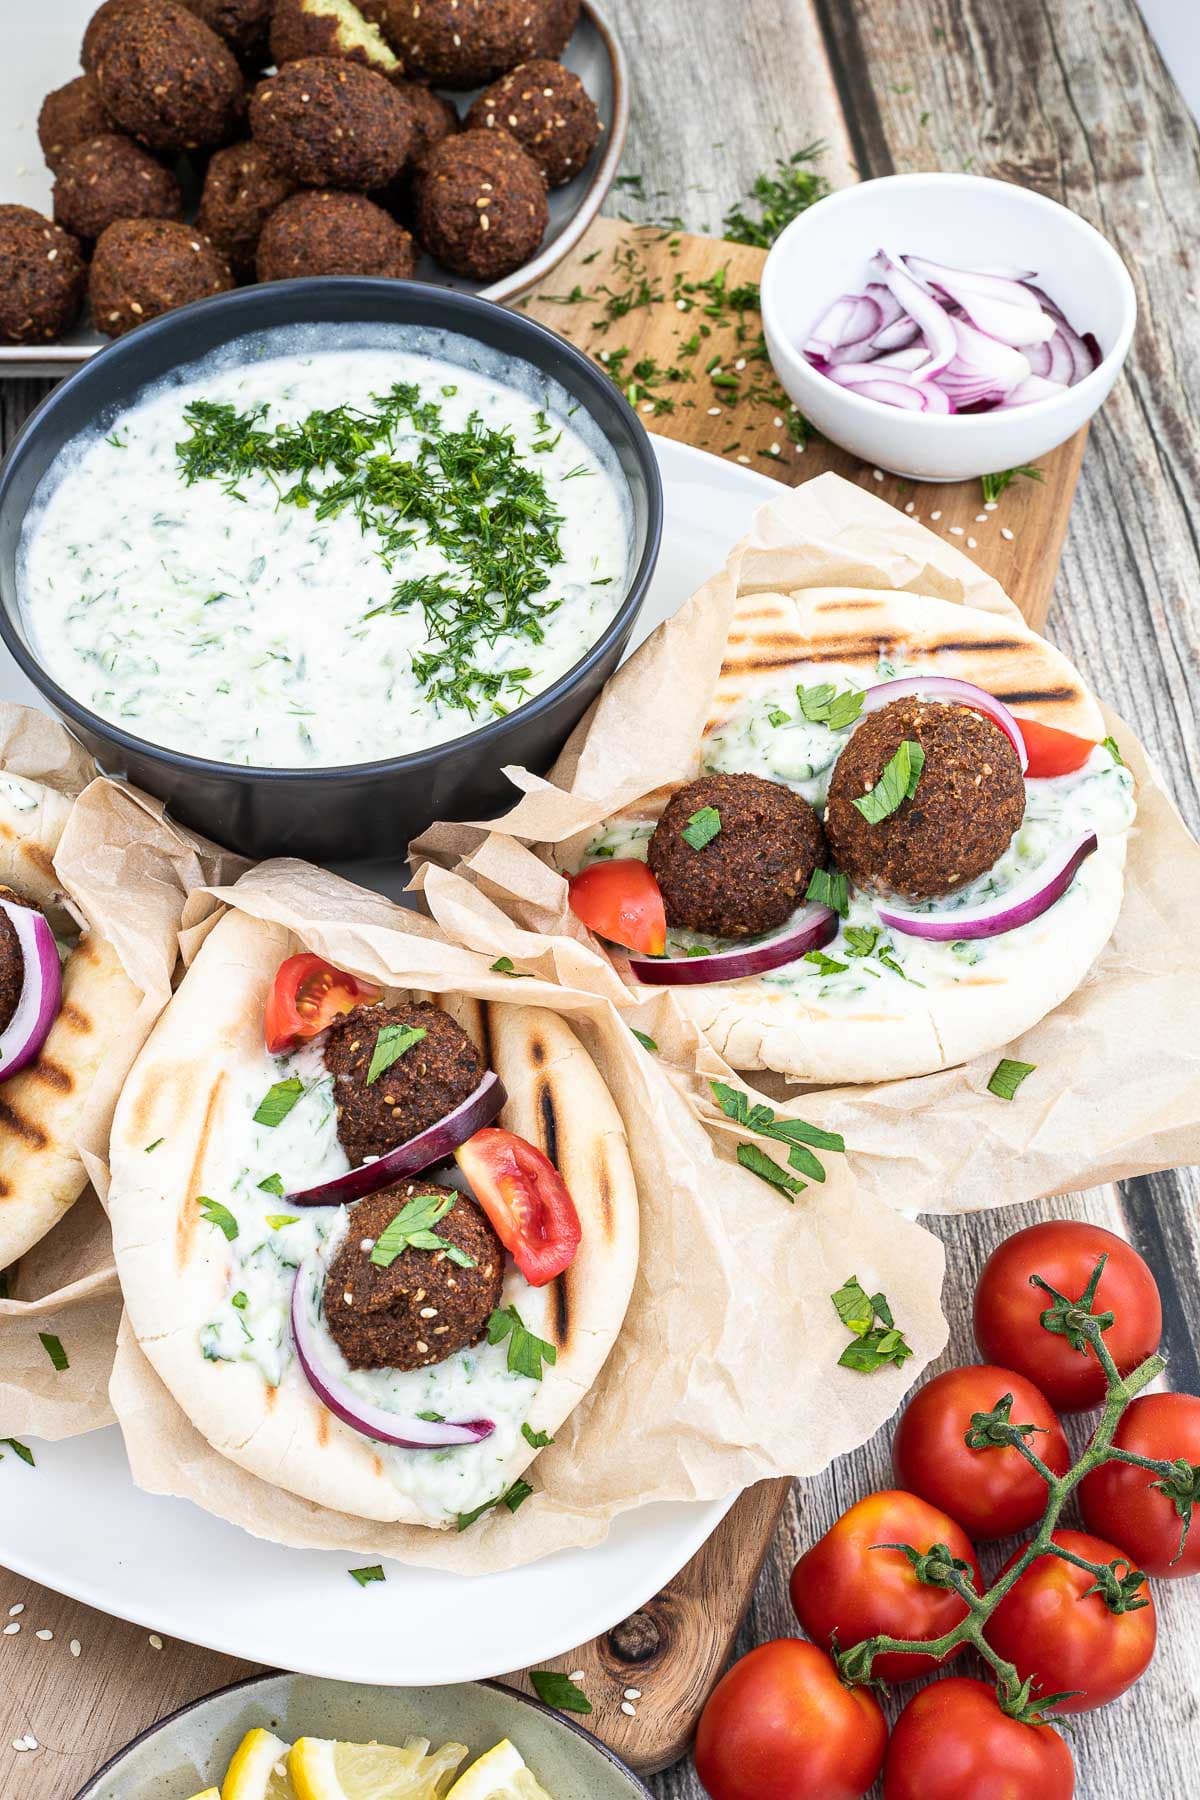 3 pitas folded and stuffed with 2 brown falafel balls, white grated cucumber salad, tomato and purple onion slices. A black bowl of white grated cucumber sauce is placed next to them. Leftover ingredients are placed in balls and on plates around it.